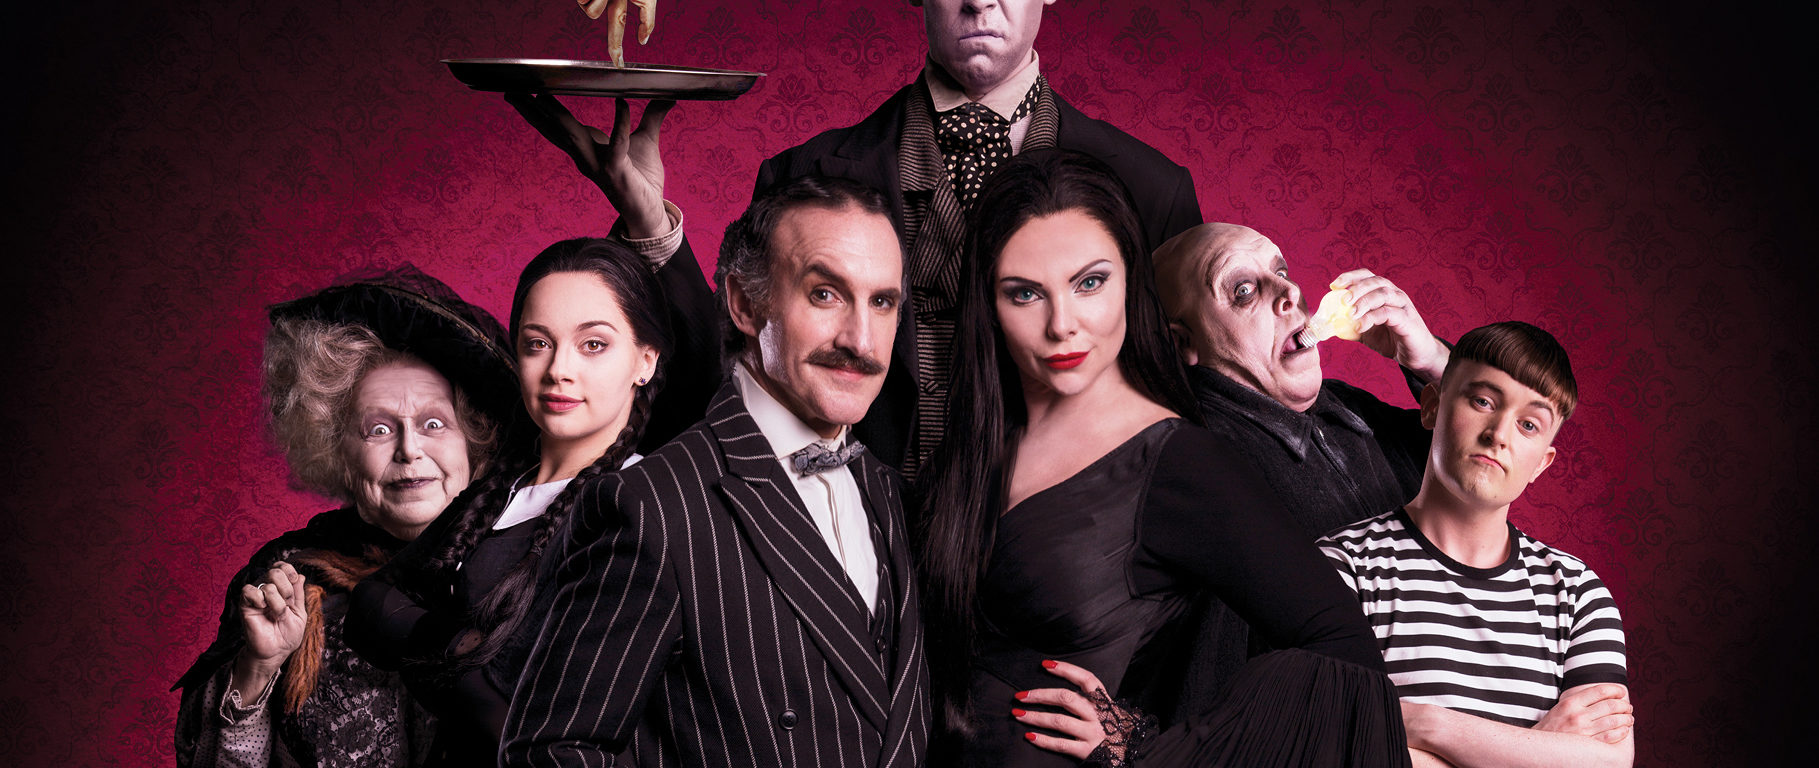 You'll Die Laughing The Addams Family Review TN2 Magazine